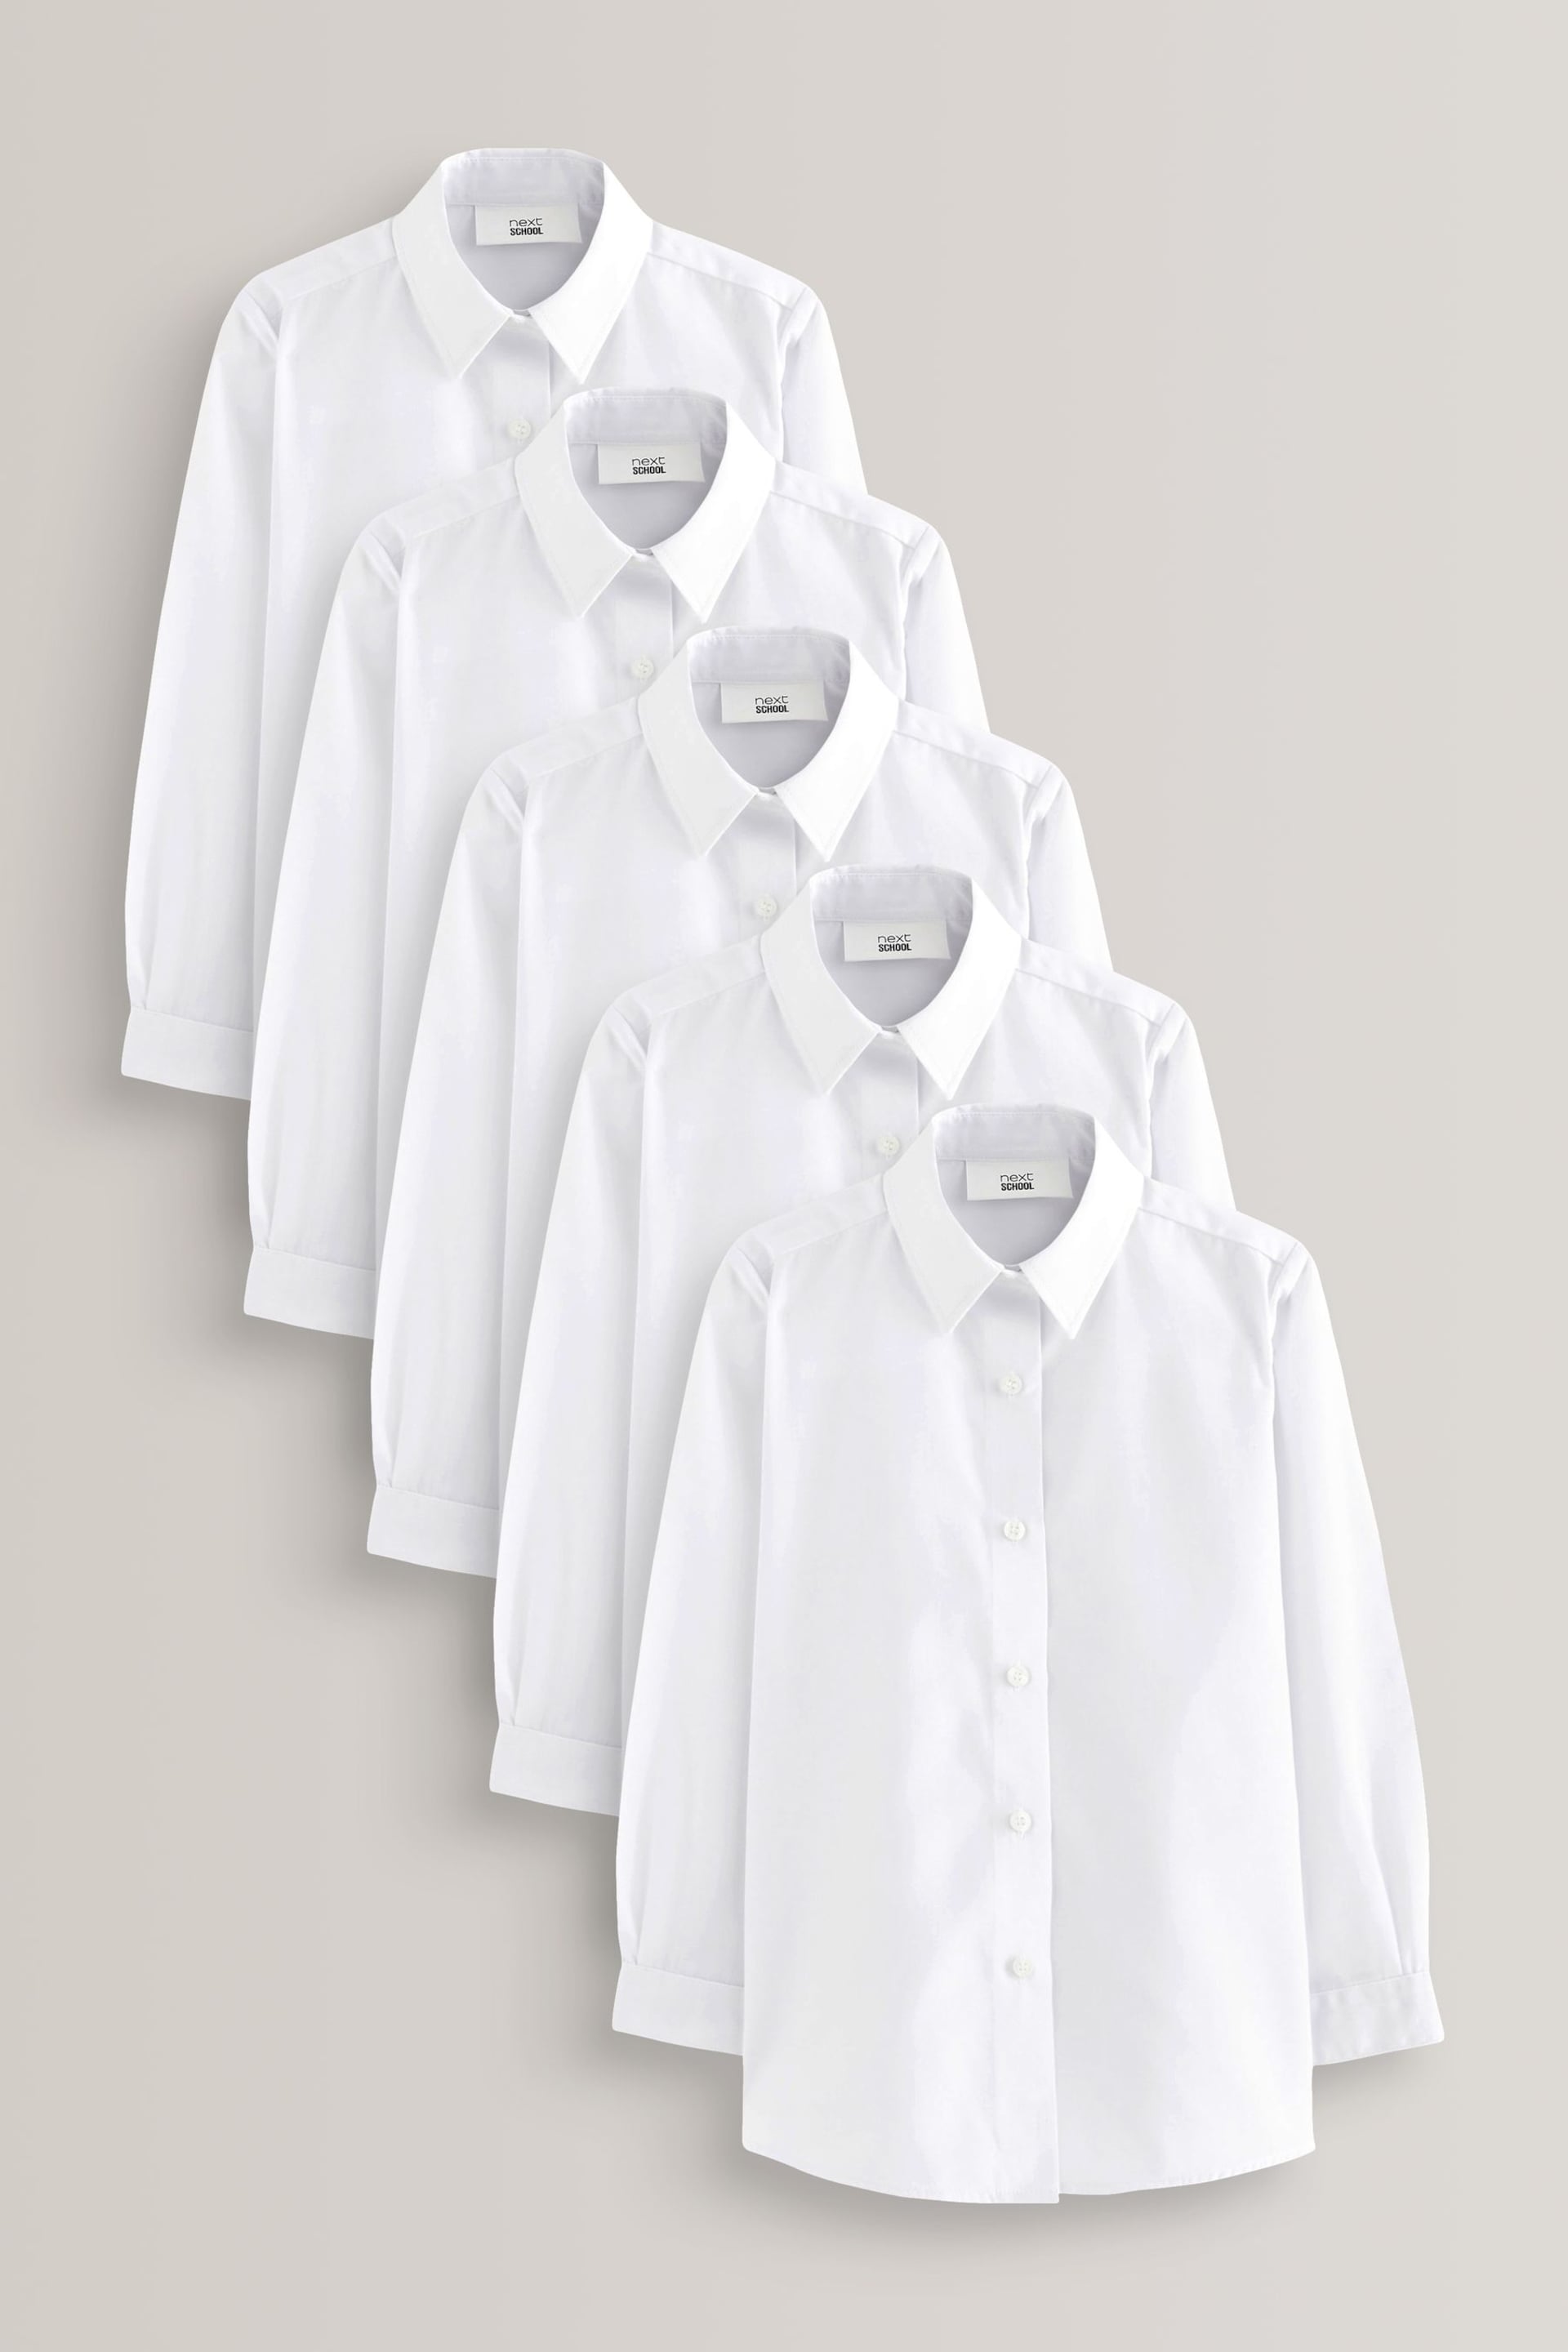 White Regular Fit 5 Pack Long Sleeve Formal School Shirts (3-18yrs) - Image 1 of 7